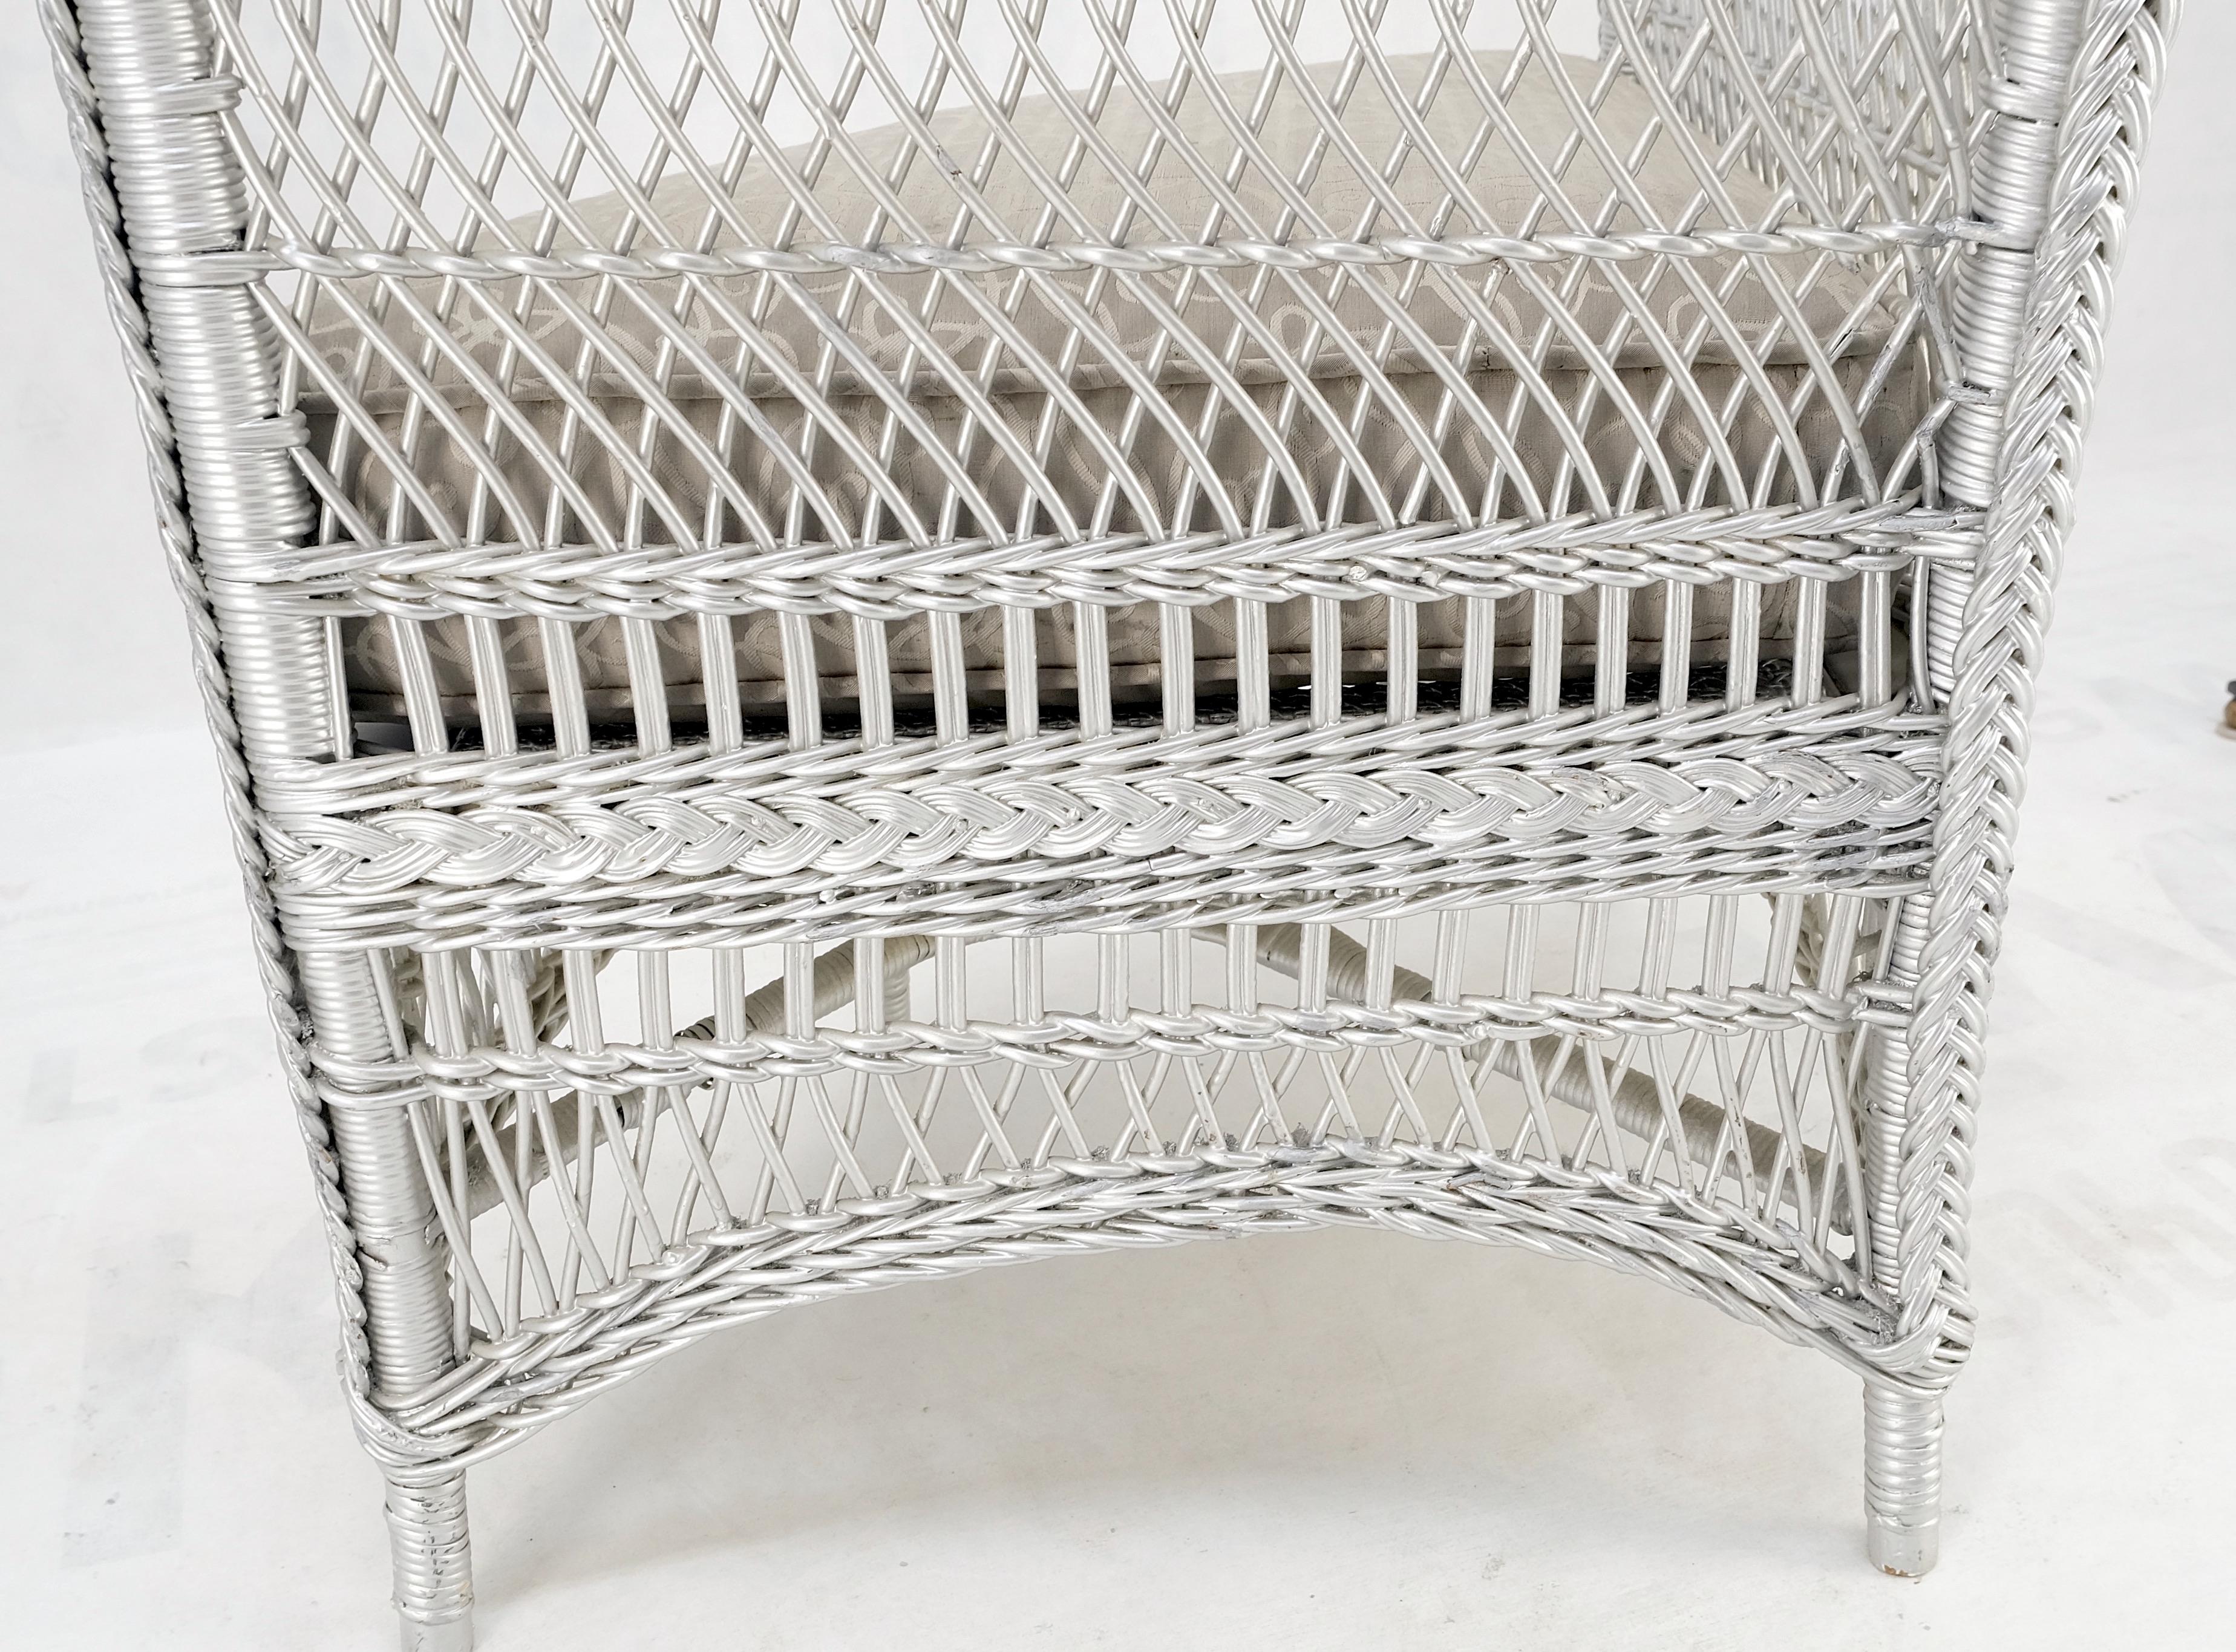 Antique Wicker Corner Chair Finished Painted in Silver Metal Finish Mint For Sale 2